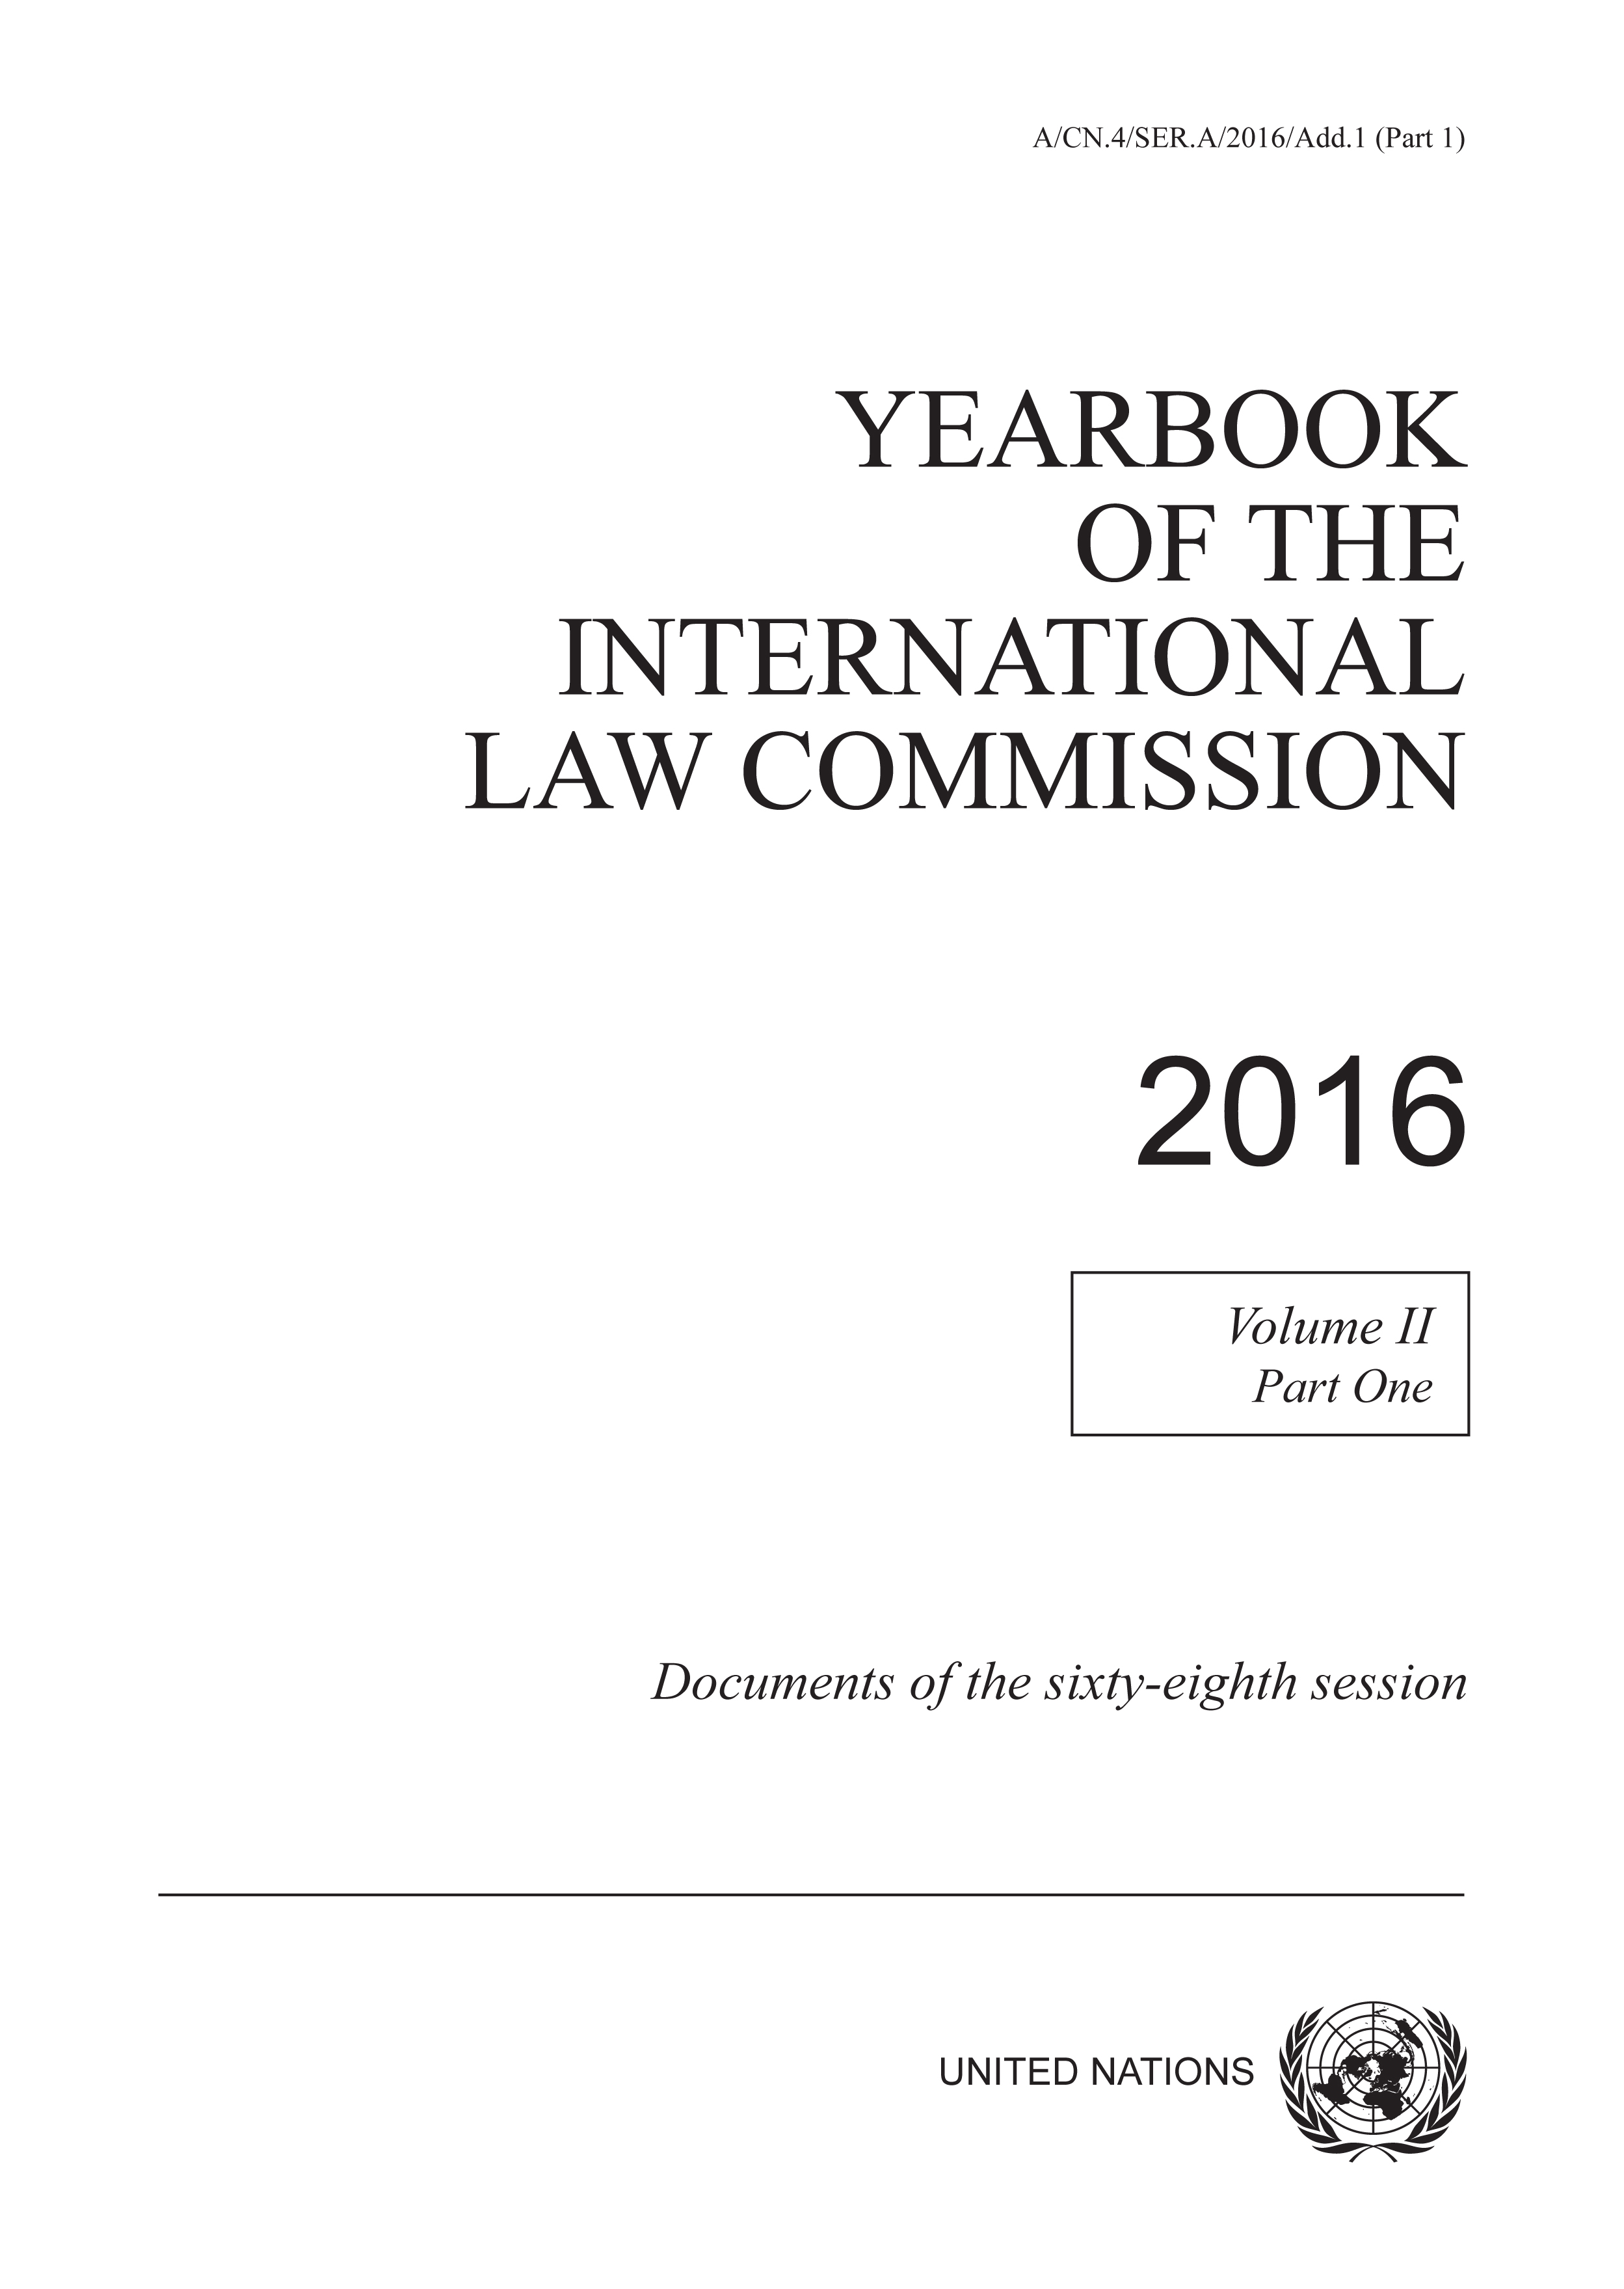 image of Yearbook of the International Law Commission 2016, Vol. II, Part 1